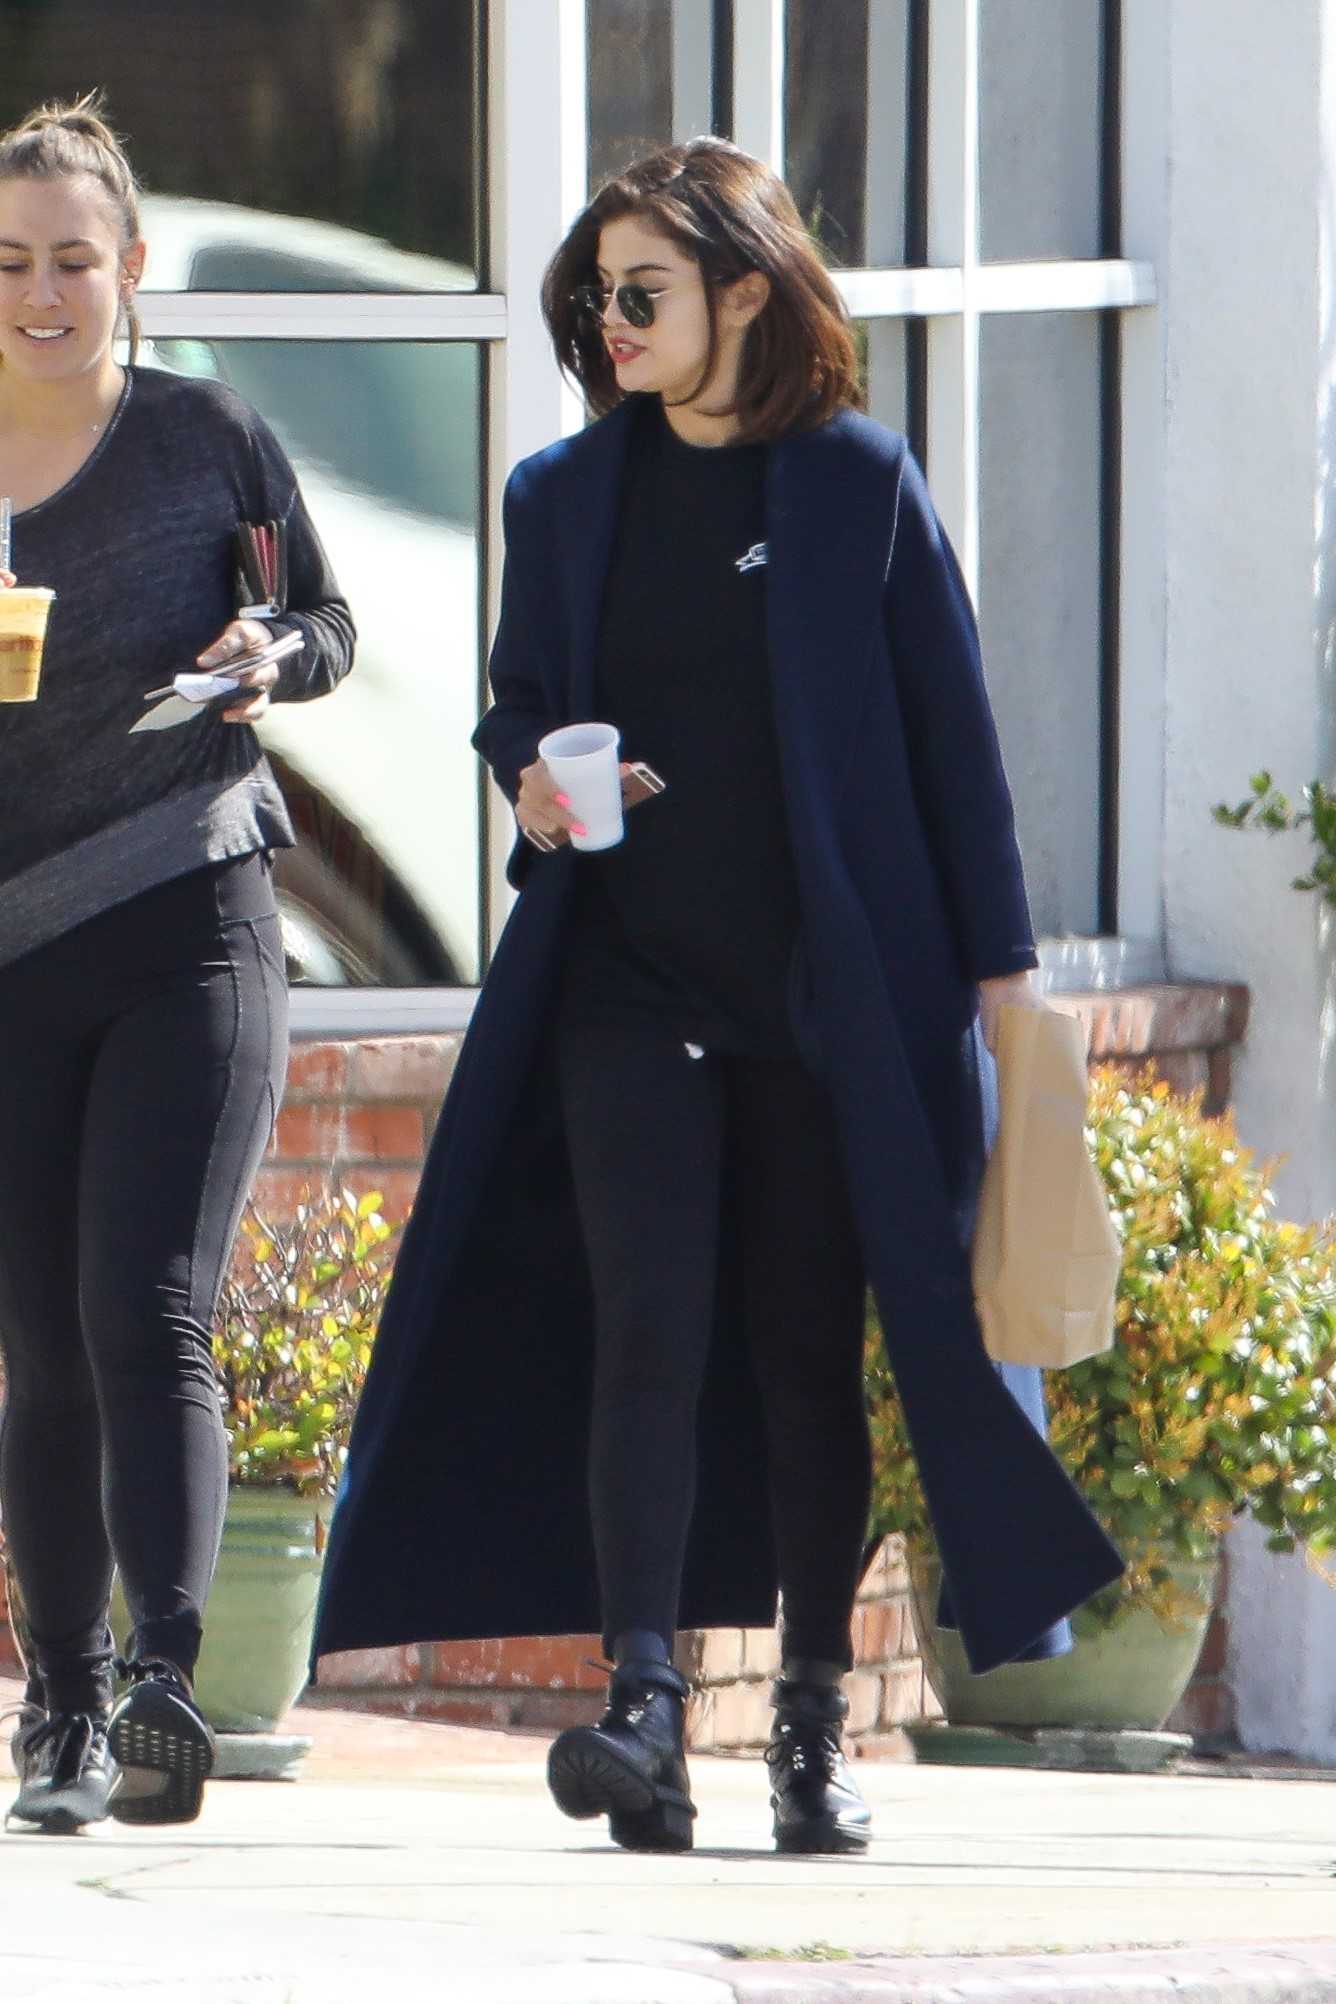 Selena_Gomez_-_Out_for_Breakfast_with_Friends_in_Los_Angeles_on_March_7-02.jpg